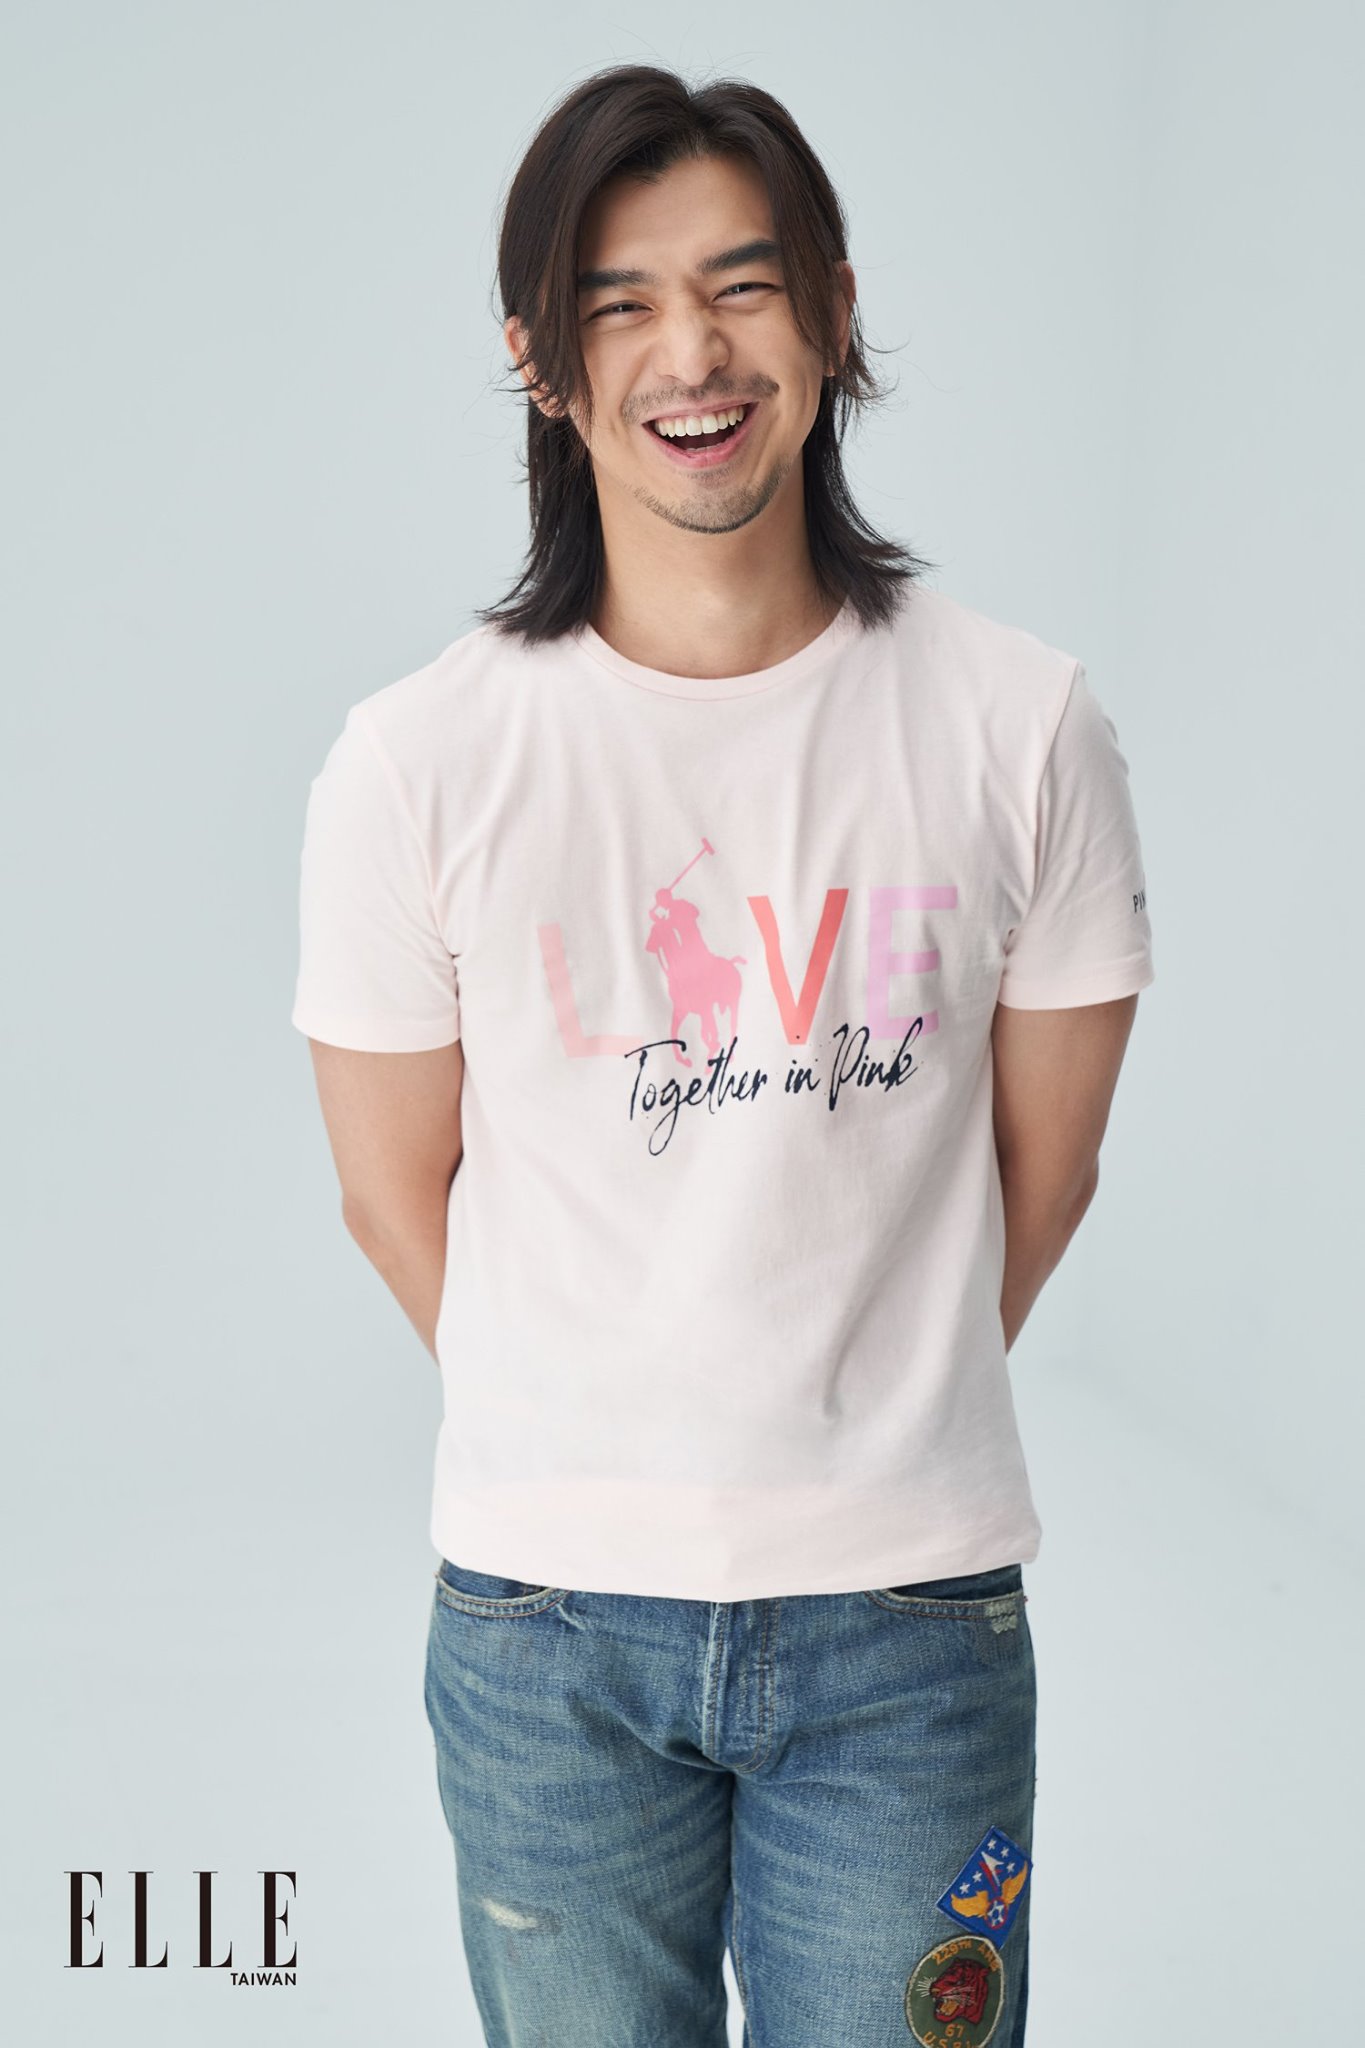 Actor Chen Bolin joins us in support of our 20-year fight against cancer for this year’s #PinkPony campaign. 傳遞粉色能量，陳柏霖身著2020 Pink Pony系列拍攝《ELLE》雜誌大片，以型男風度，訴生命溫度。  Discover the full Pink Pony collection and how you can support:...